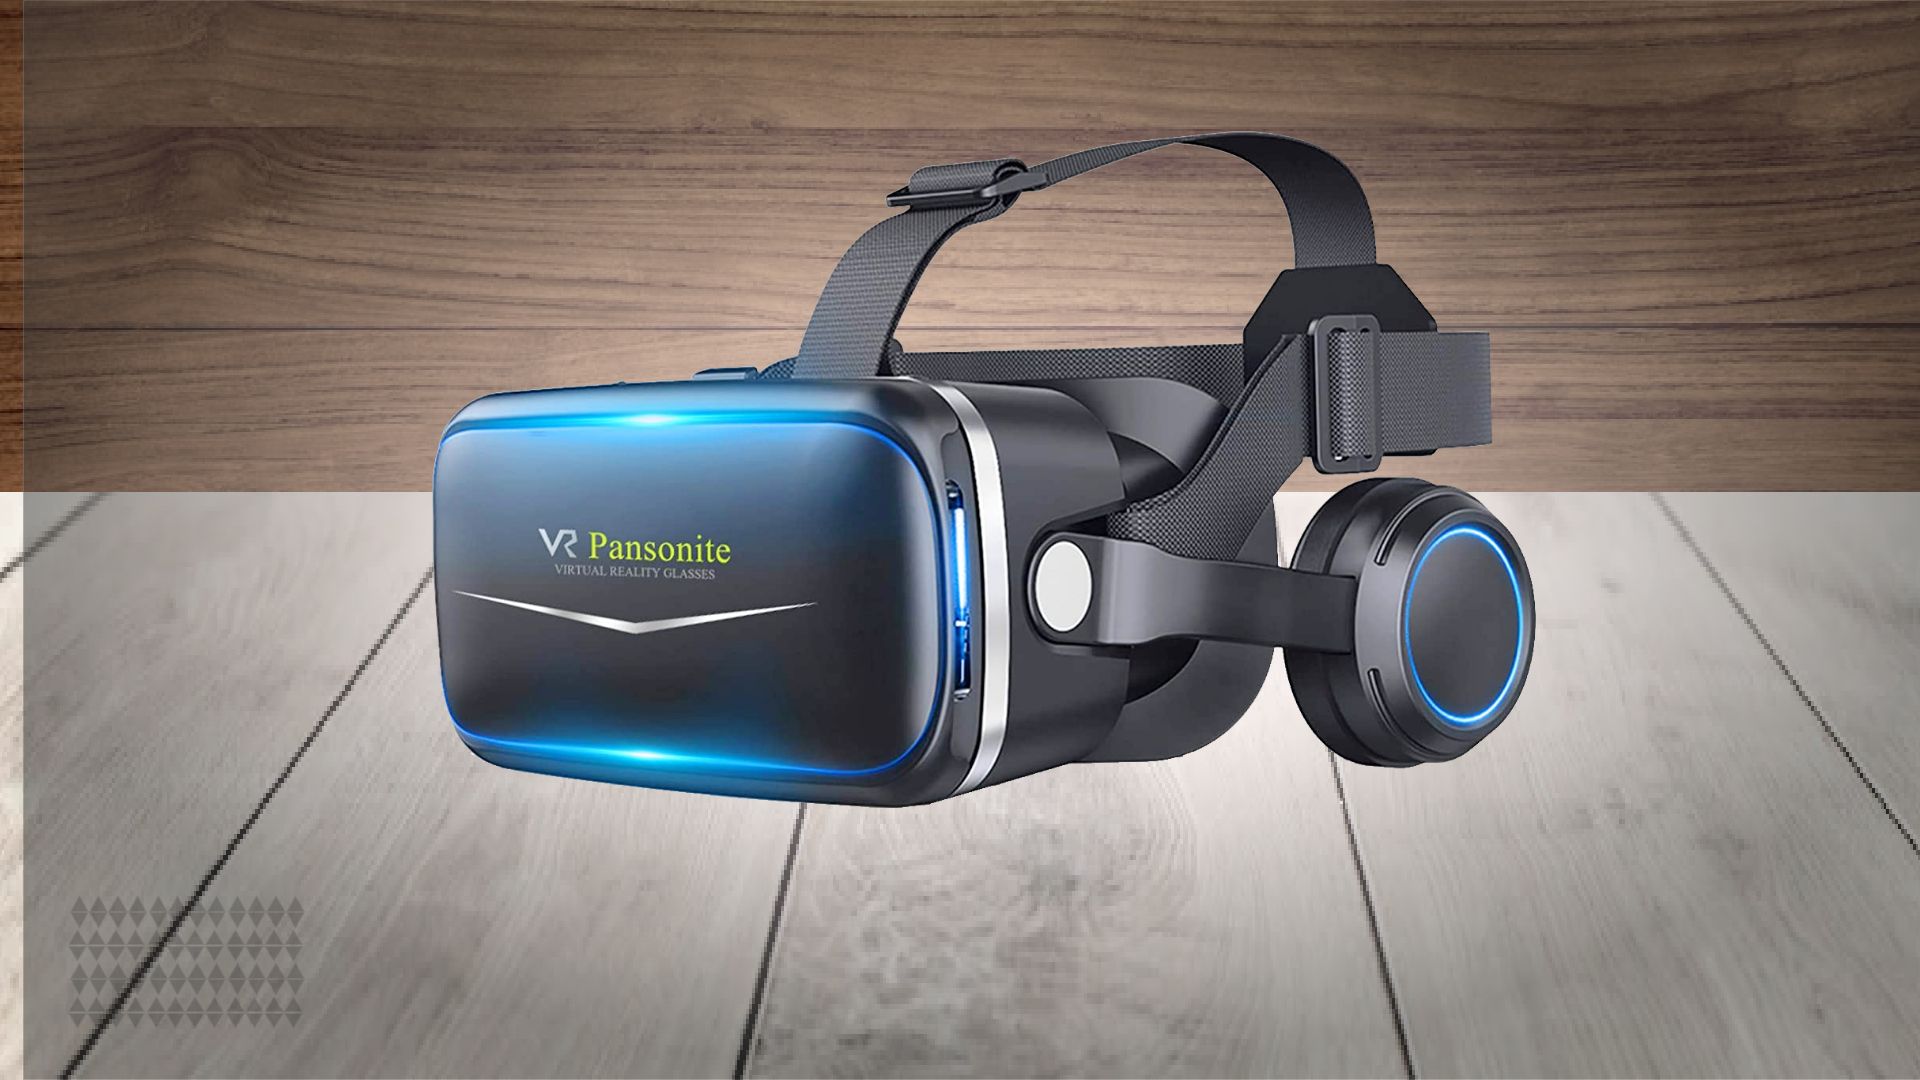 Pansonite VR Headset with Remote Control